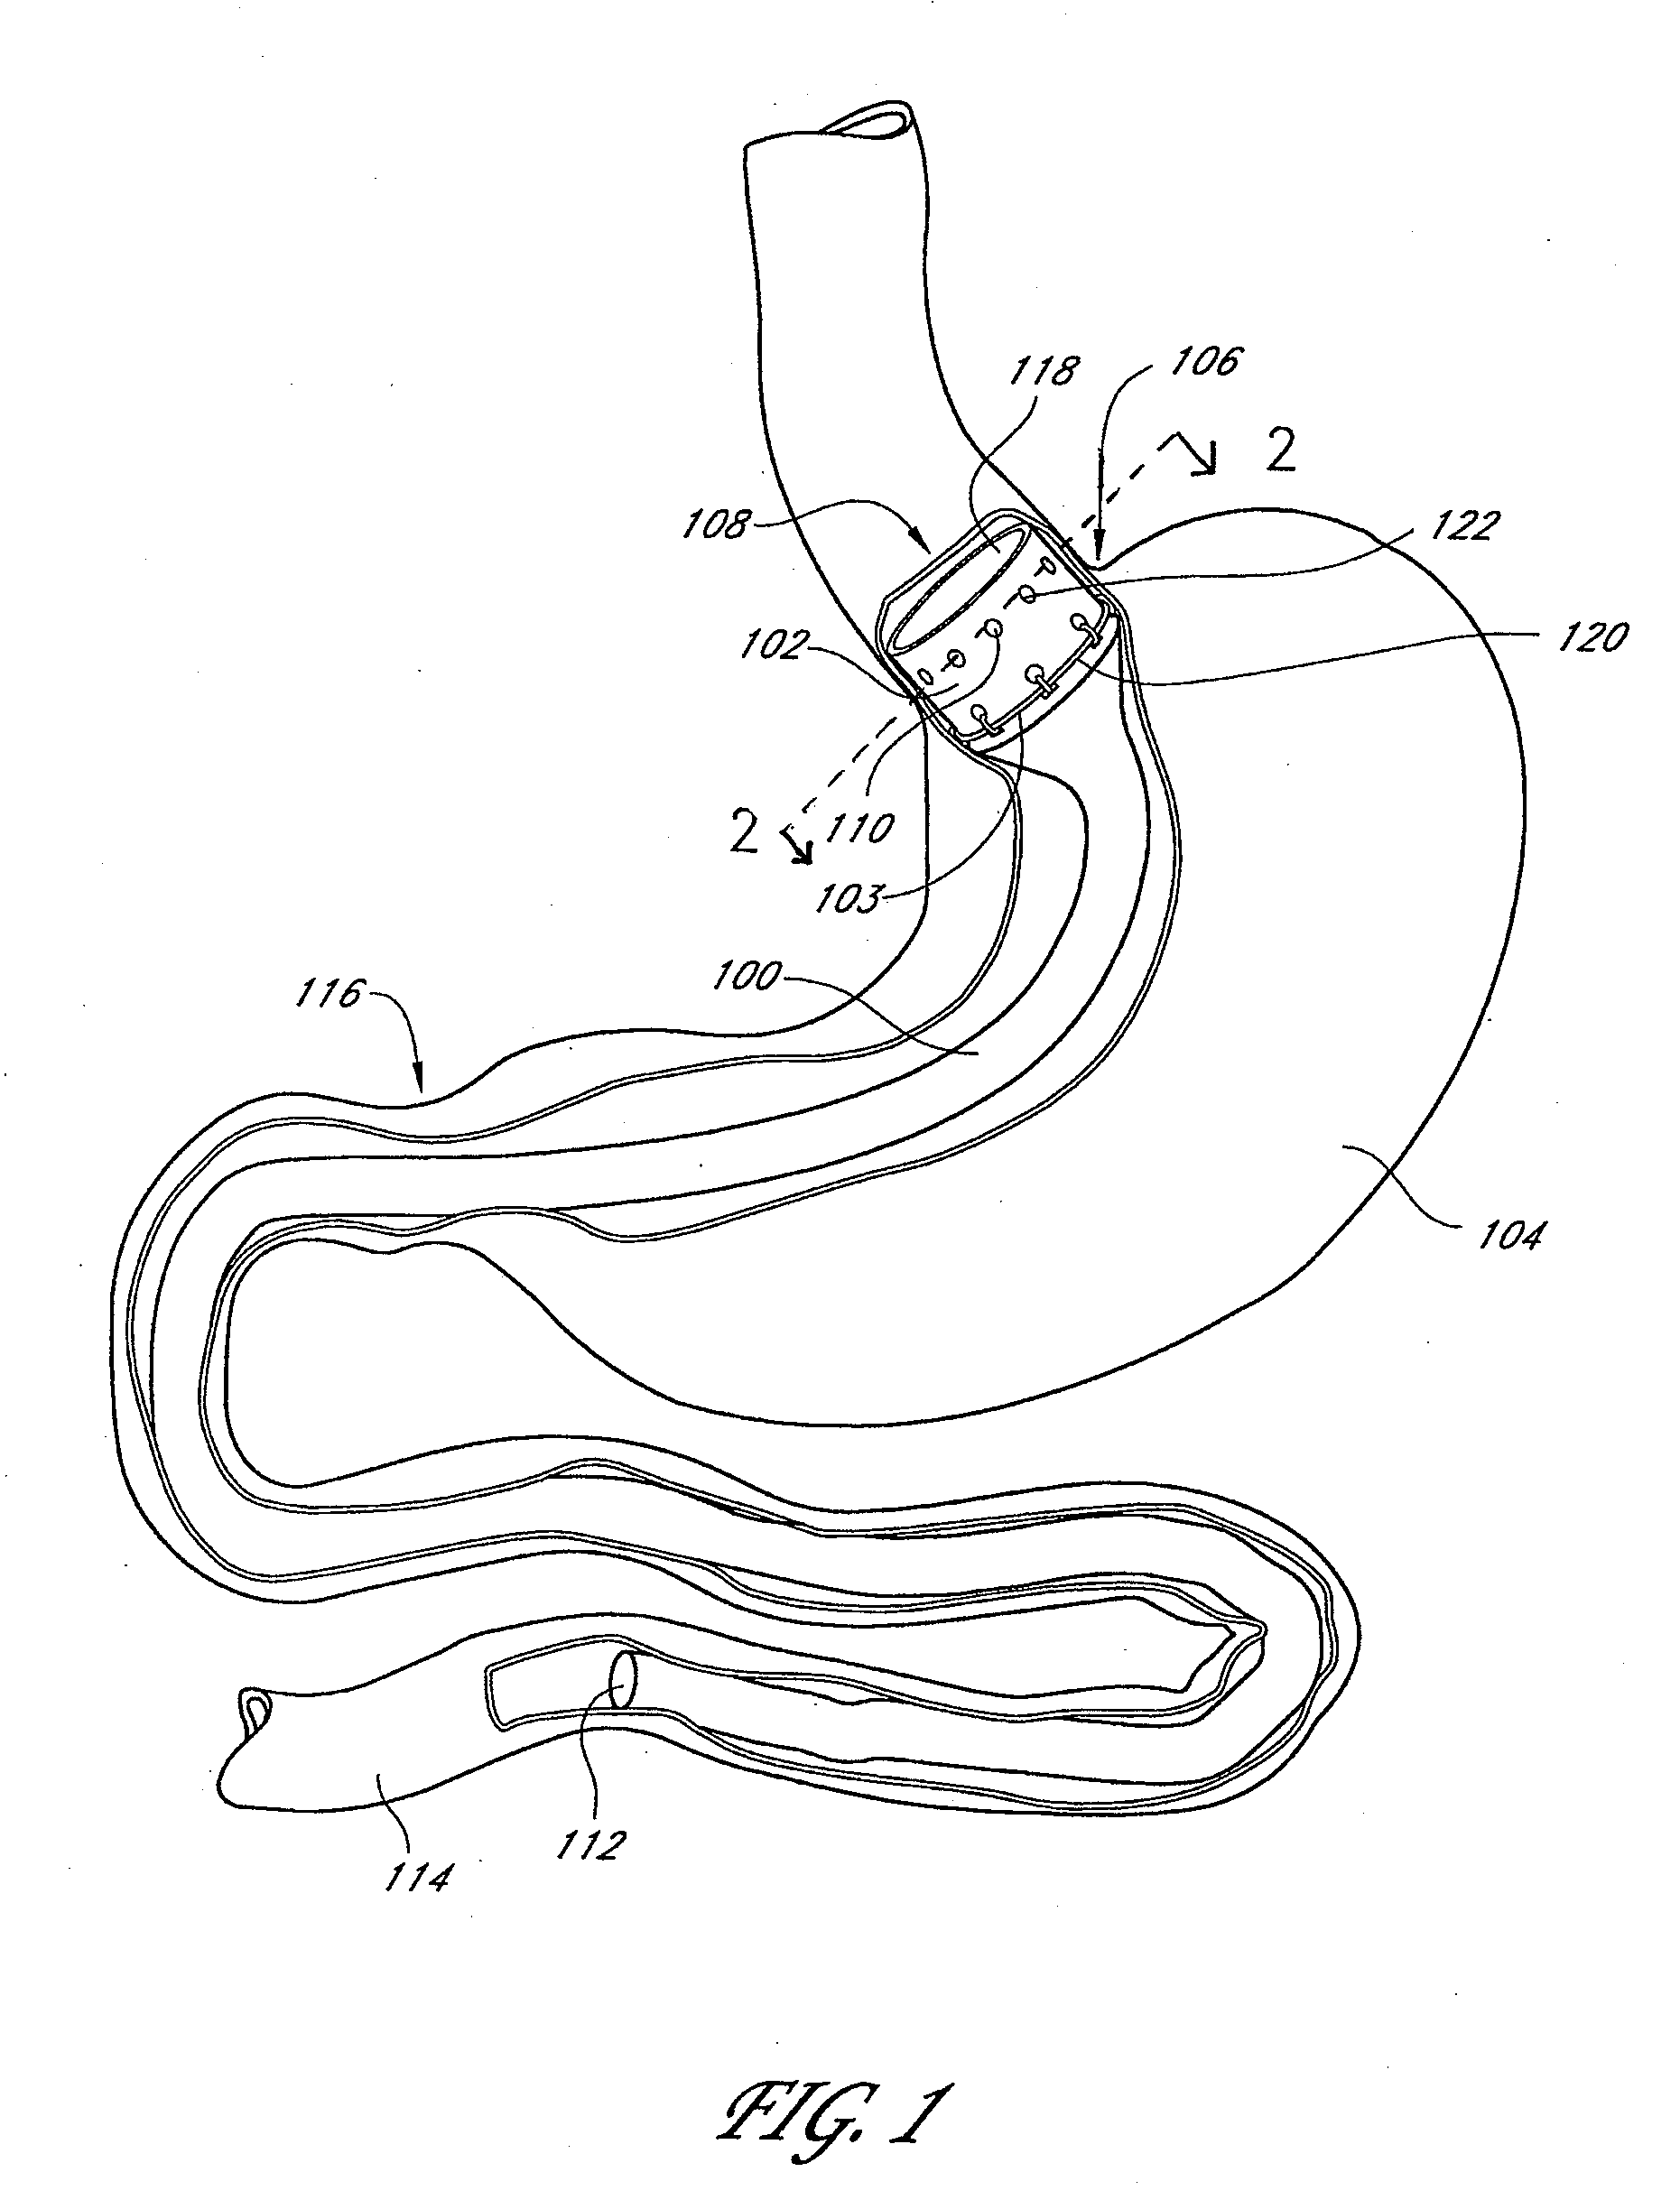 Devices and methods for endolumenal gastrointestinal bypass